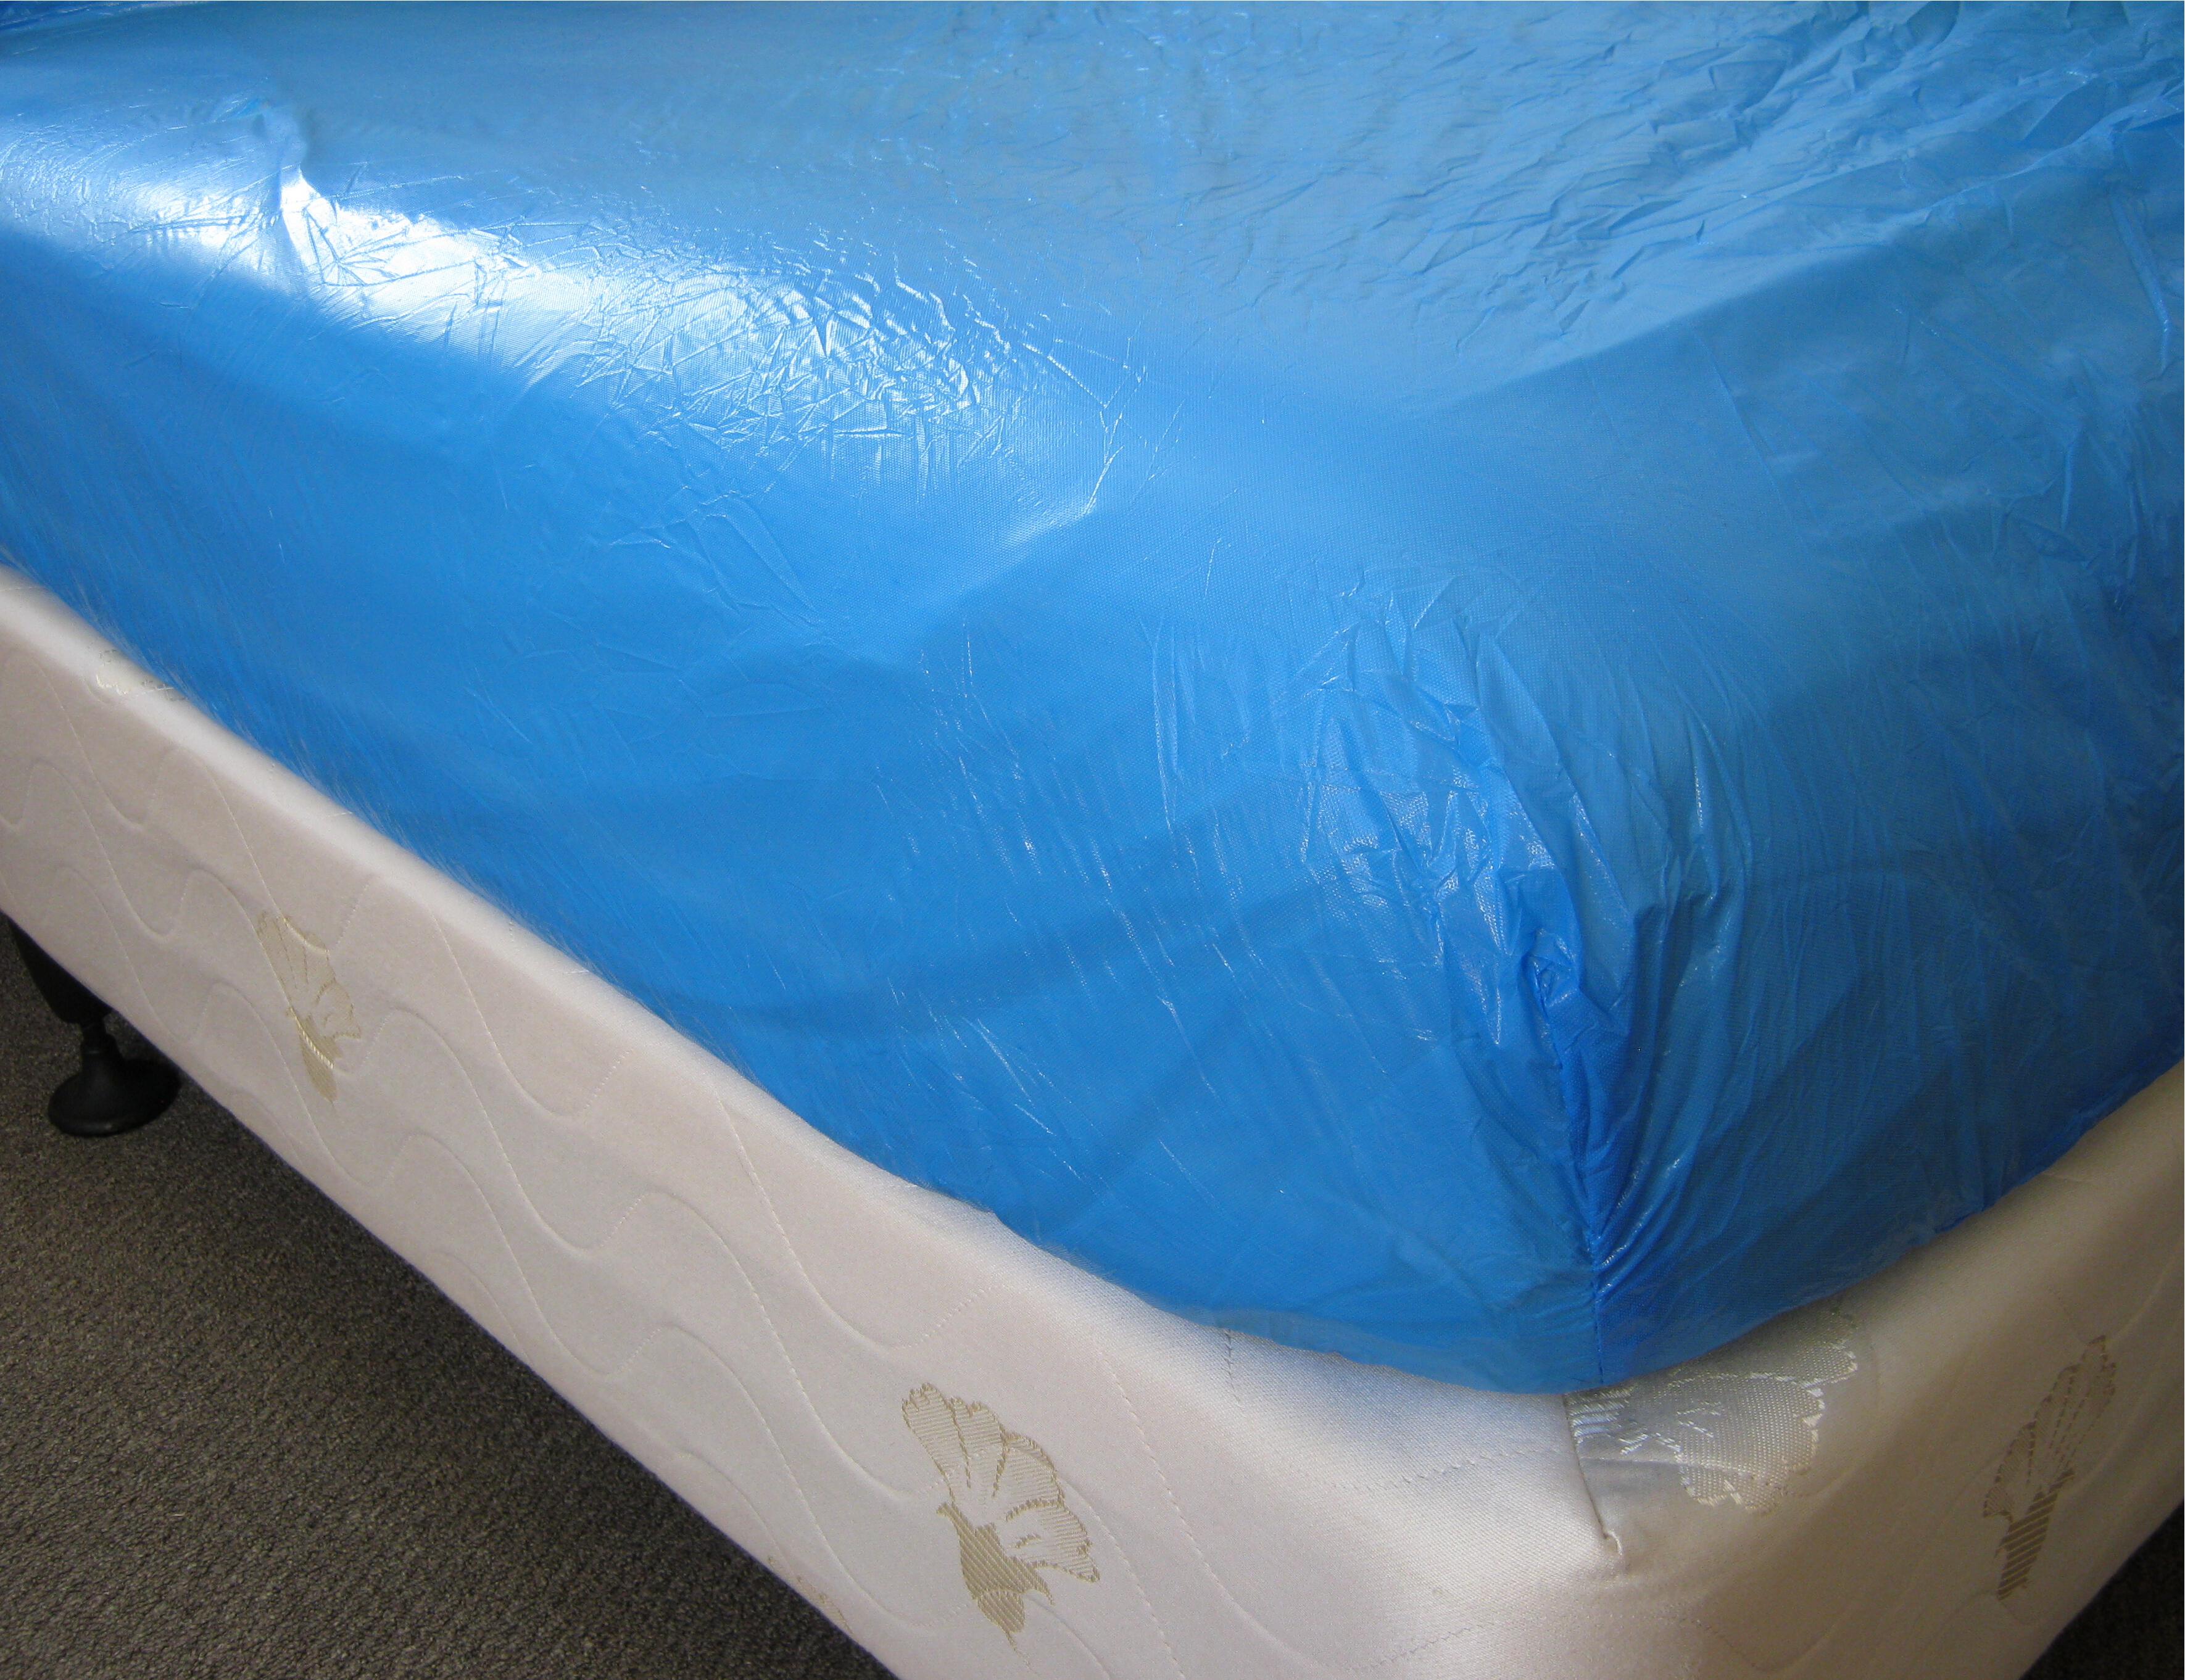 http://www.first-aid.co.nz/image/catalog/products/Bedding/mattress_protector_fitted_single_sheet.jpg